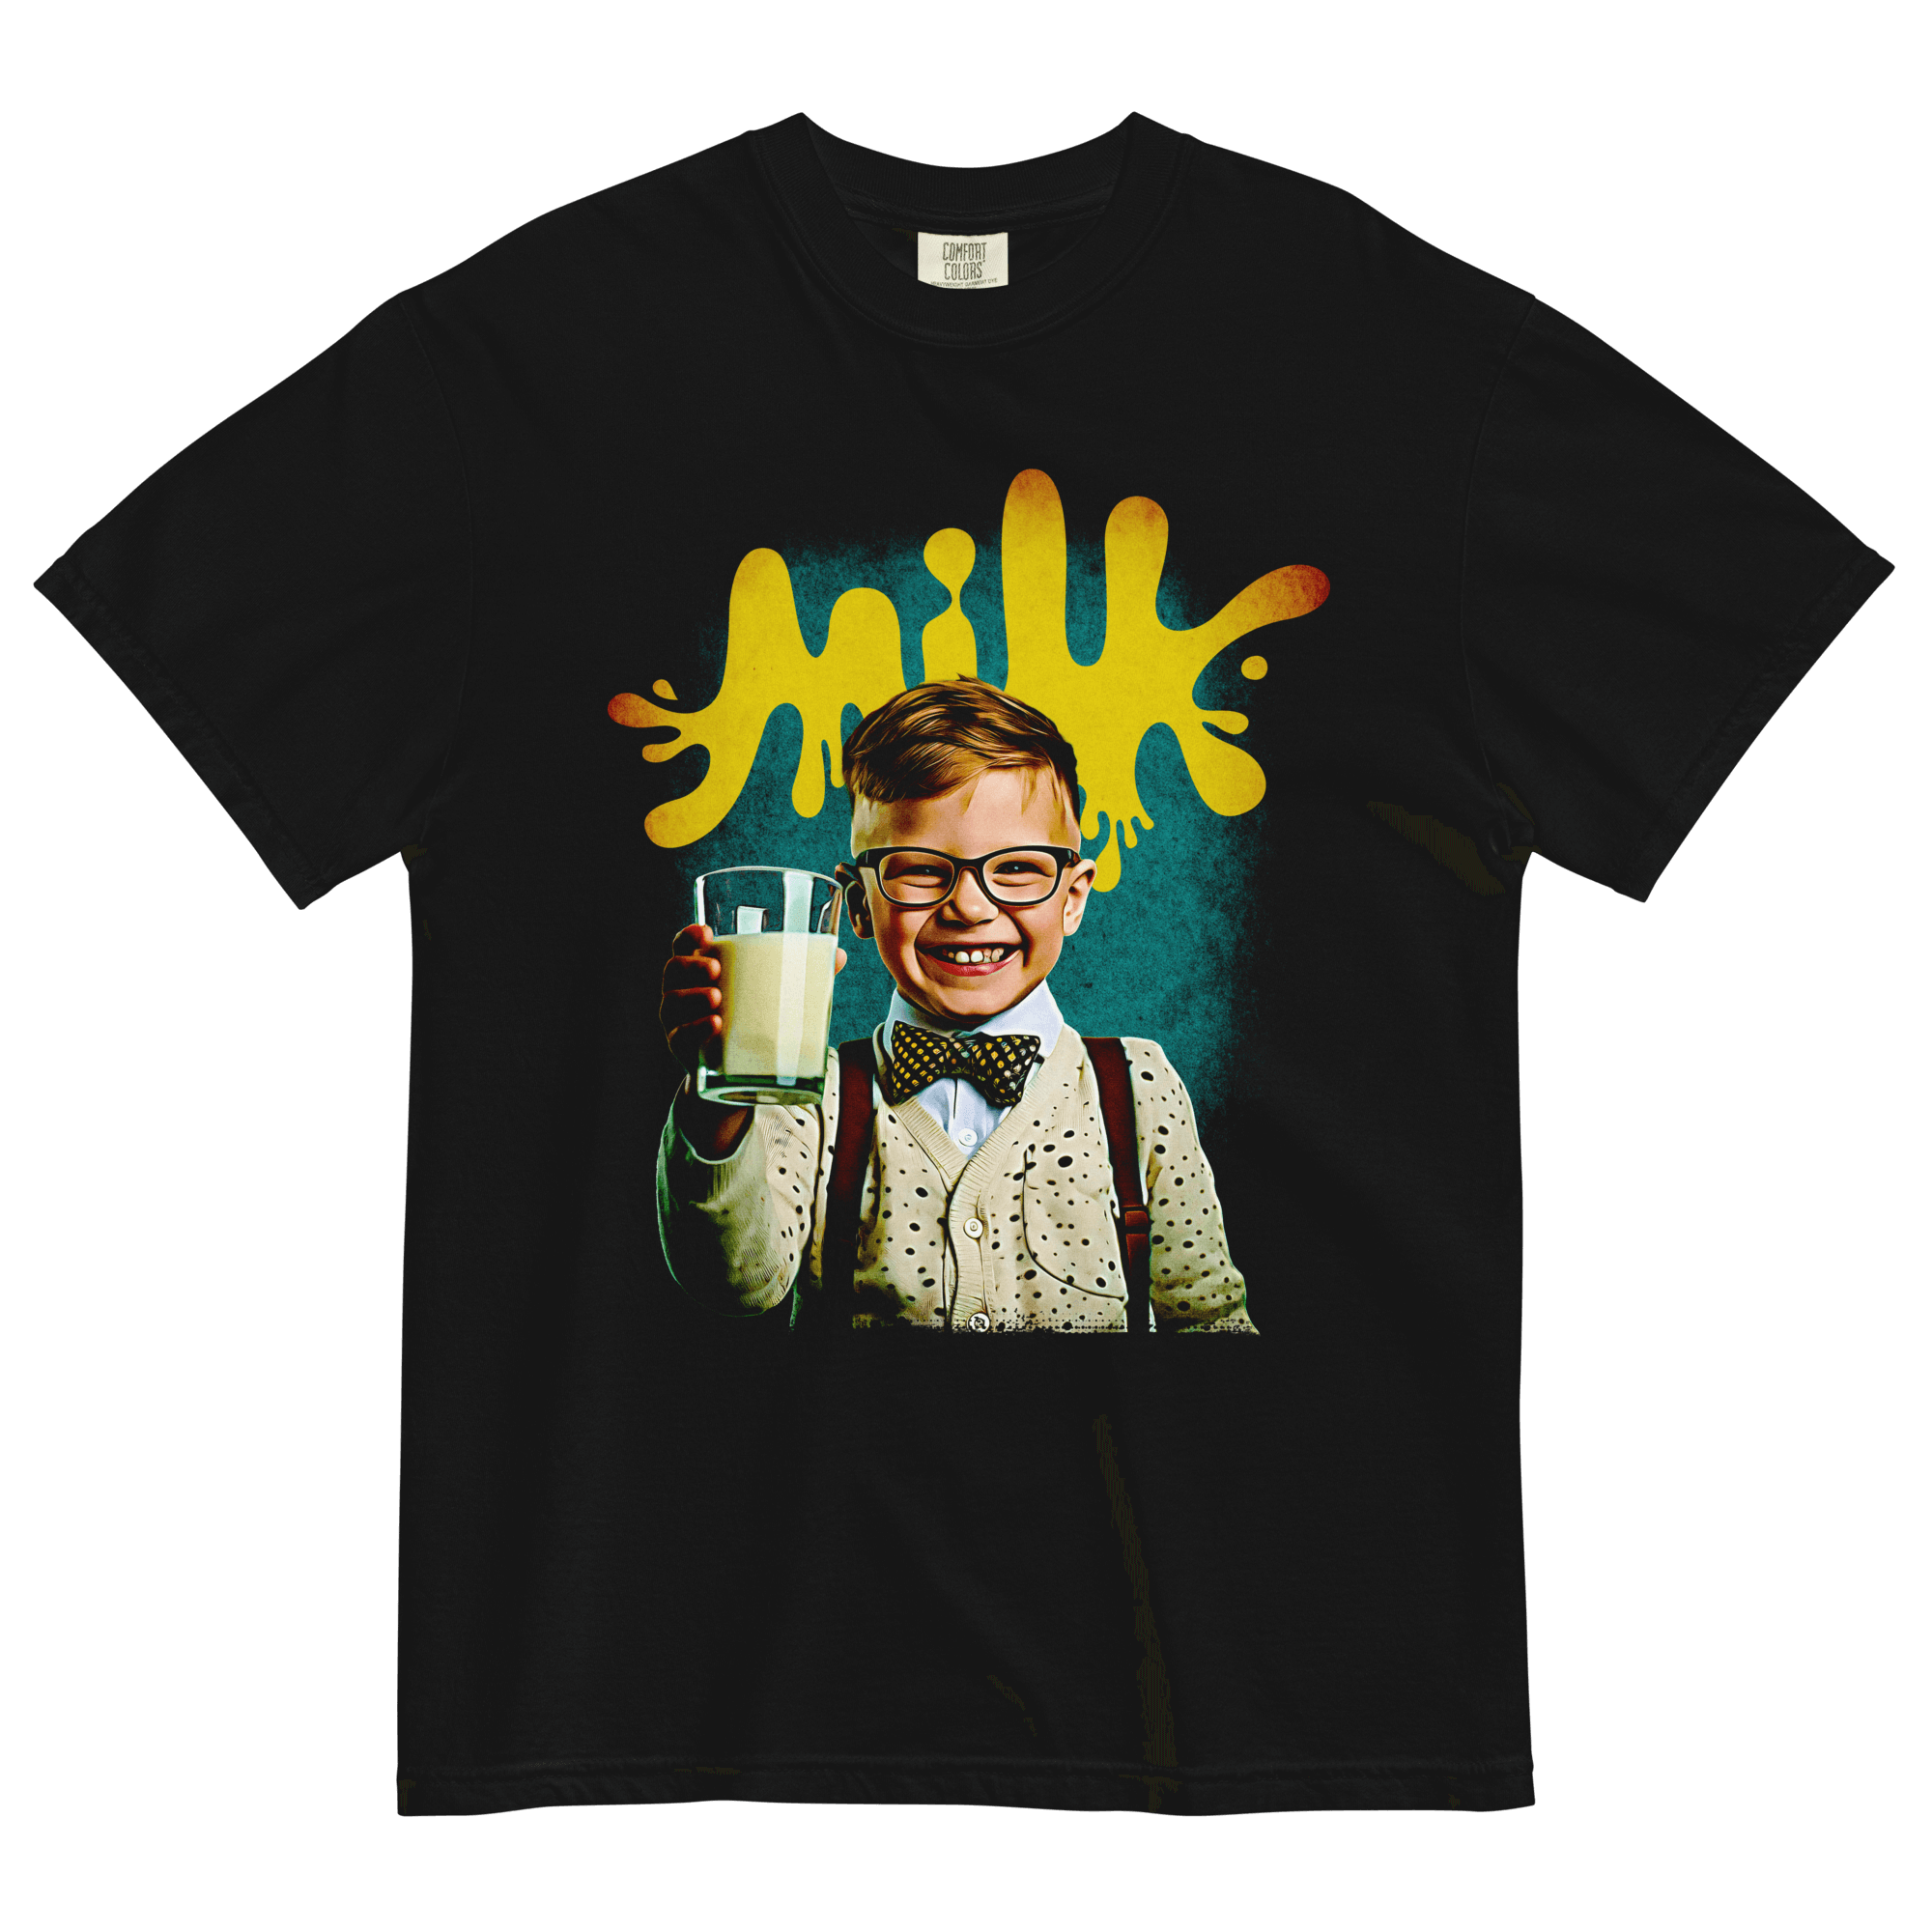 Milk T-shirtGet creamy with our Milk T-shirt – 50s vibes, 100% cotton comfort, and streetwear swag all in one. Snatch this dairy darling now! • 100% ring-spun cotton • Fabric weight: 6.1 oz/yd² (206.8 g/m²) • Garment-dyed • Relaxed fit • 7/8″ double-needl